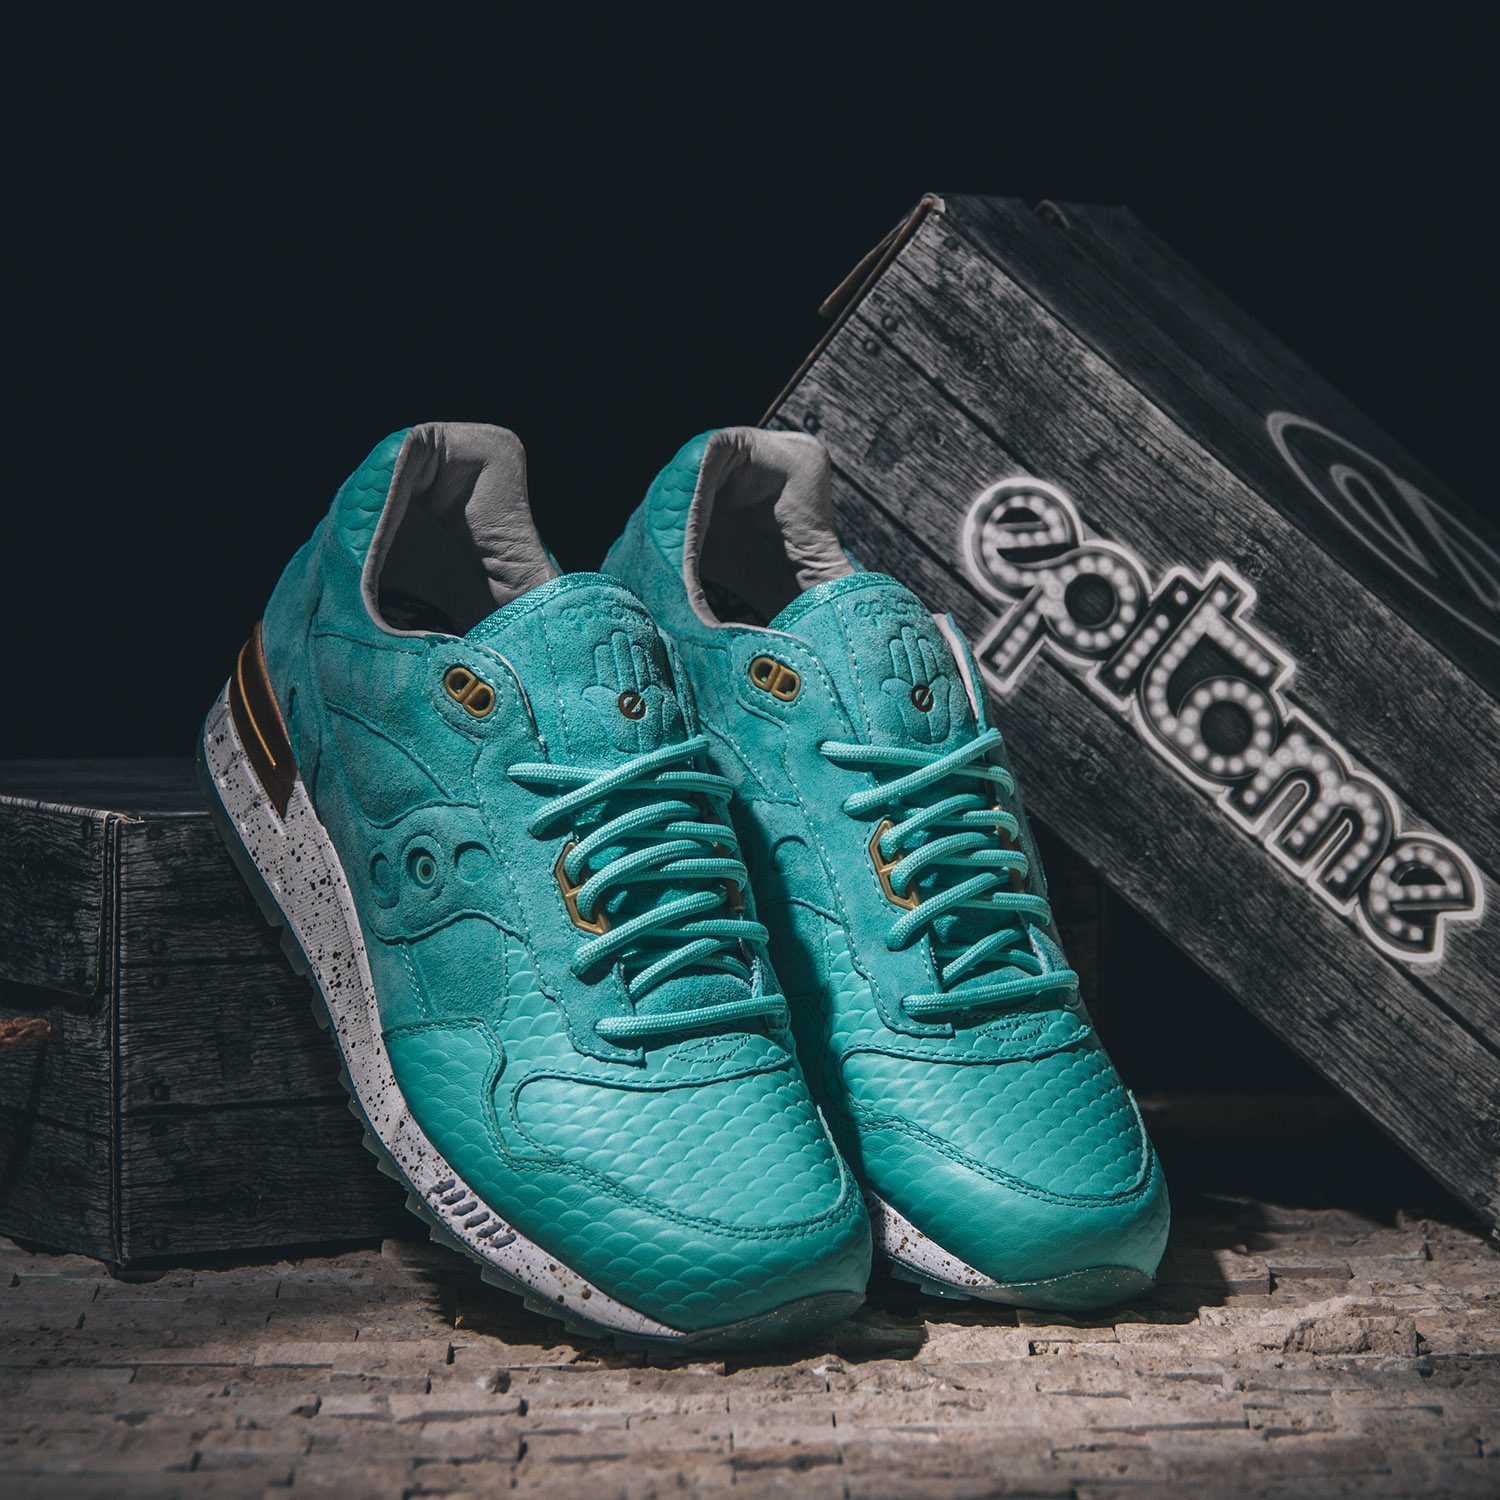 Saucony x Epitome The Righteous One 110